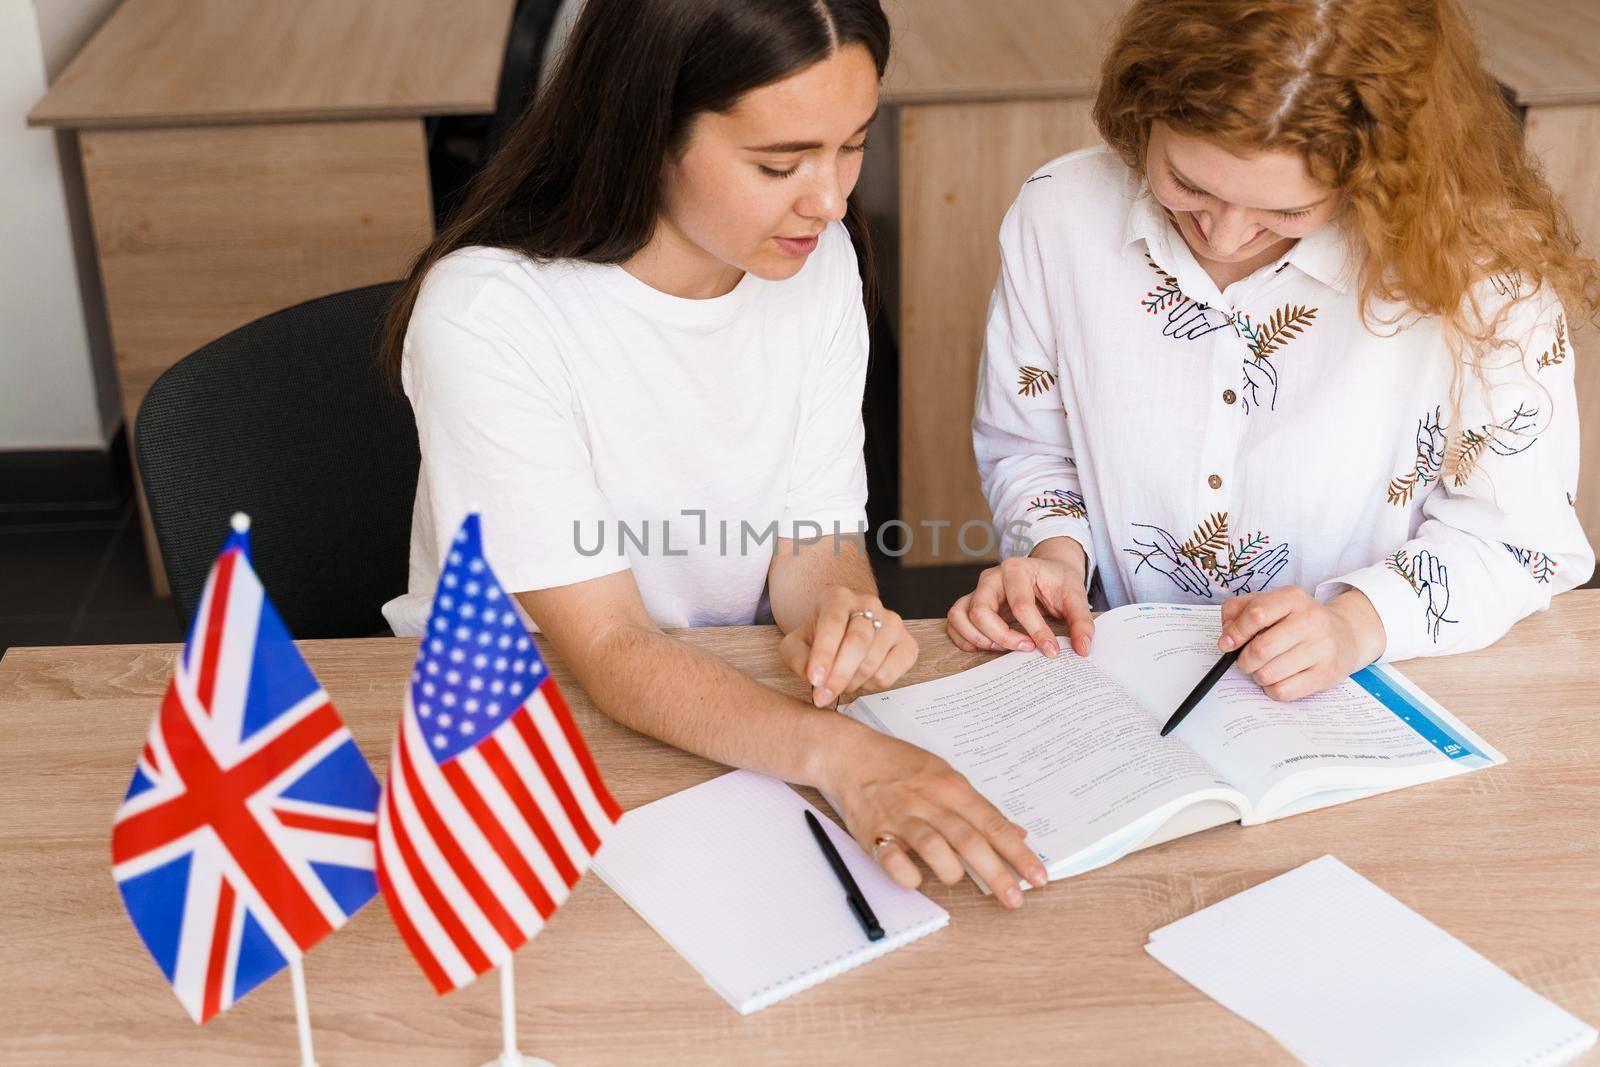 Teacher of english asks student in white class. 2 girls student answers to teacher. Working in group. Study english and british language.